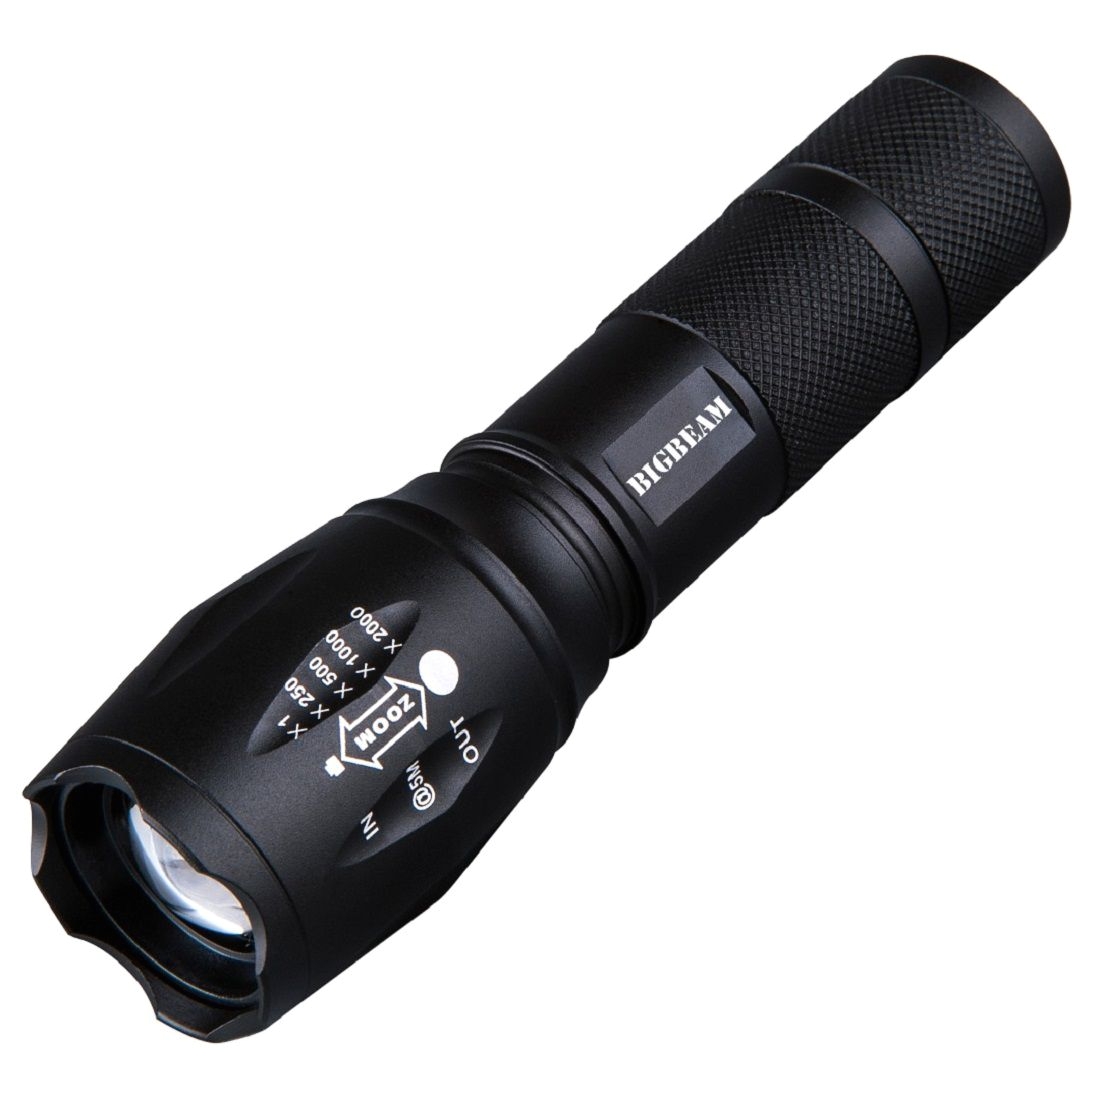 bigbeam 10w flashlight torch 5 modes light pack of 1 buy bigbeam 10w flashlight torch 5 modes light pack of 1 at best price in india on snapdeal